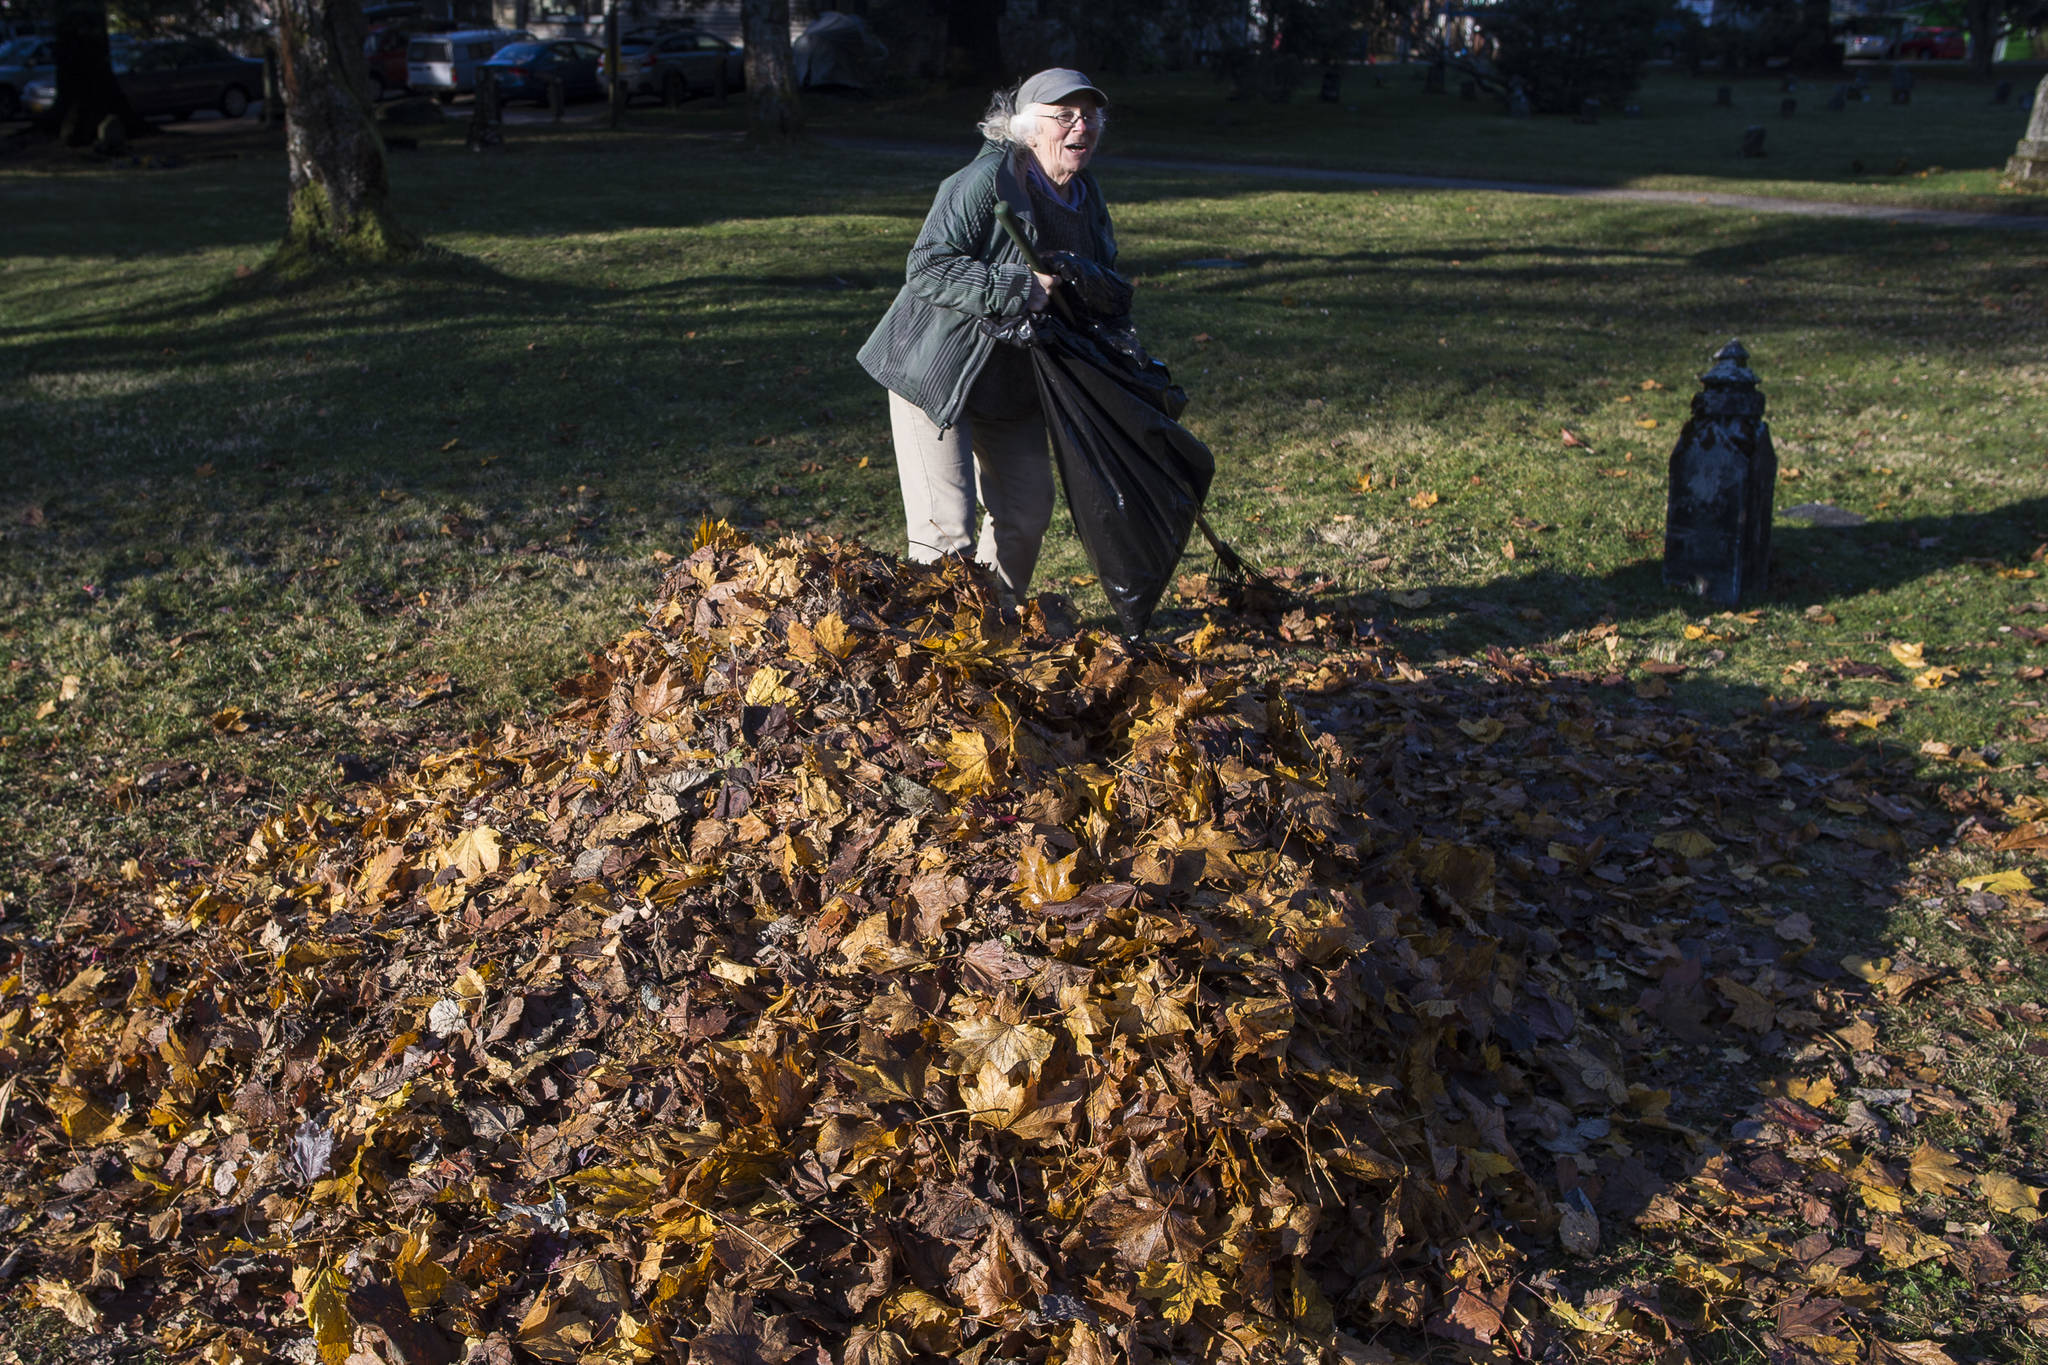 Retired teacher Linda Torgerson rakes dry leaves back into a pile at Evergreen Cemetery on Tuesday, Nov. 6, 2018. Torgerson organizes the leaf jump every year which allows local students the fall activity. (Michael Penn | Juneau Empire)